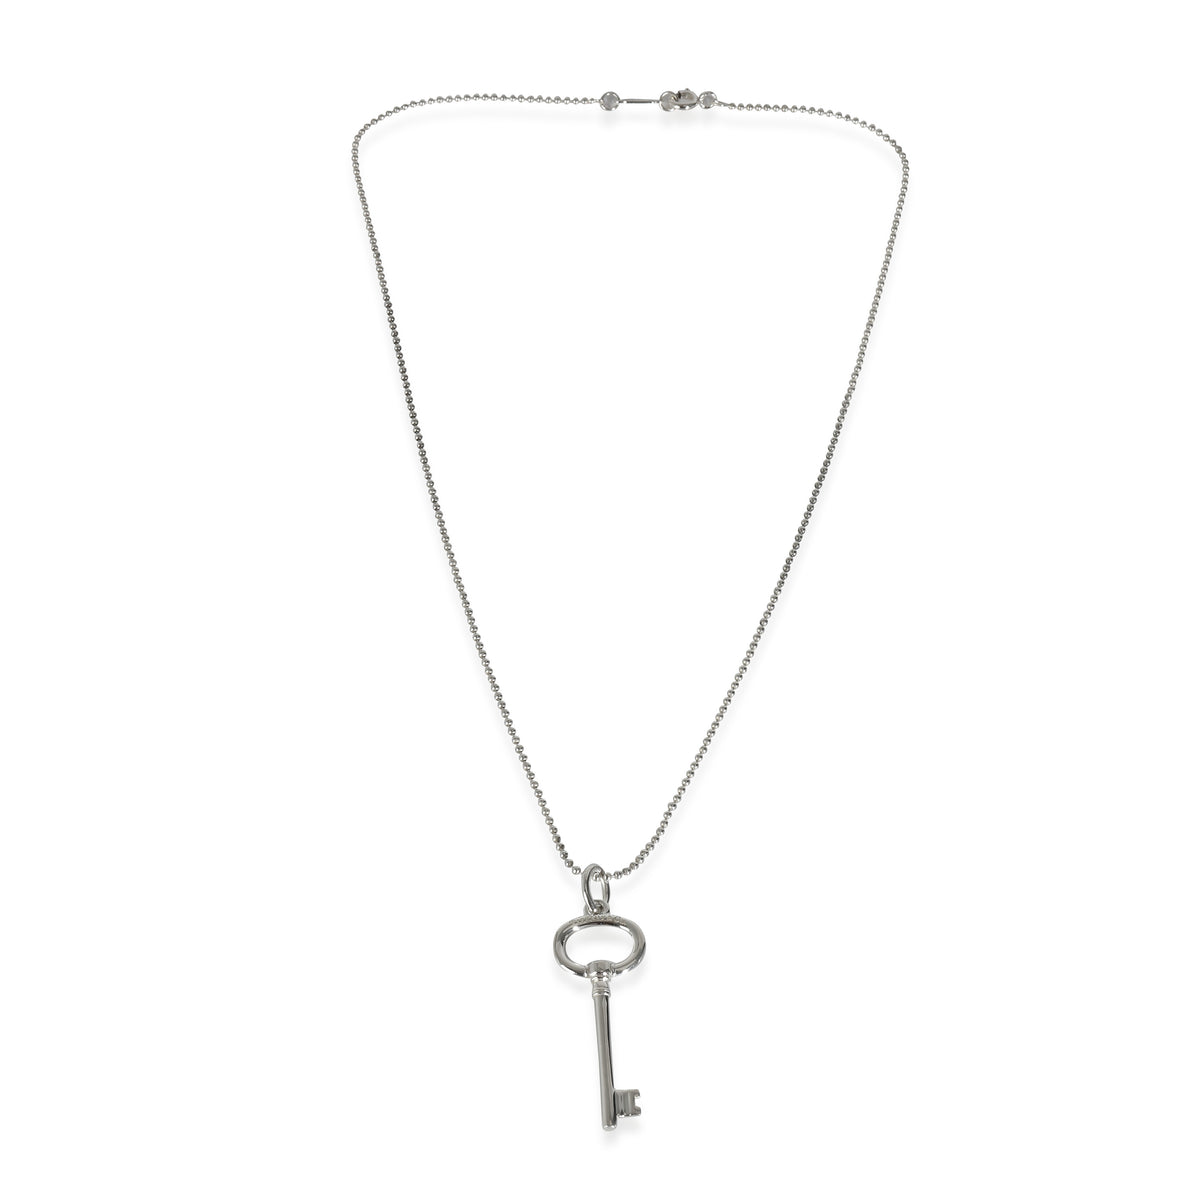 Mini Oval Key Pendant on Bead Chain in Sterling Silver